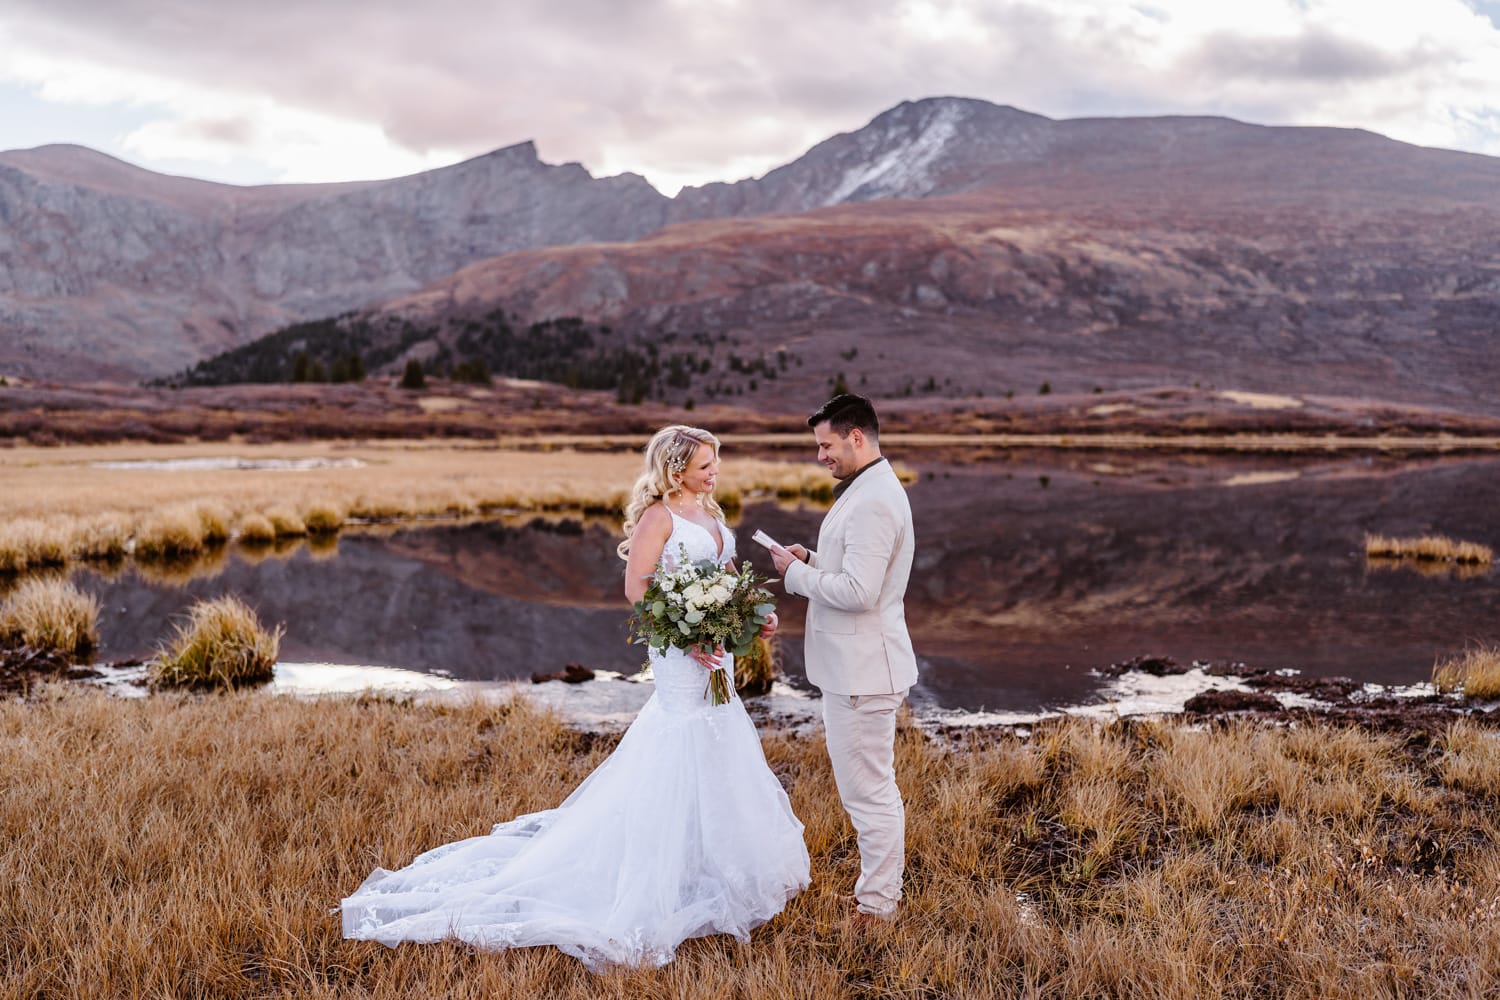 Couple sharing vows during their Self-Solemnization elopement in Colorado.